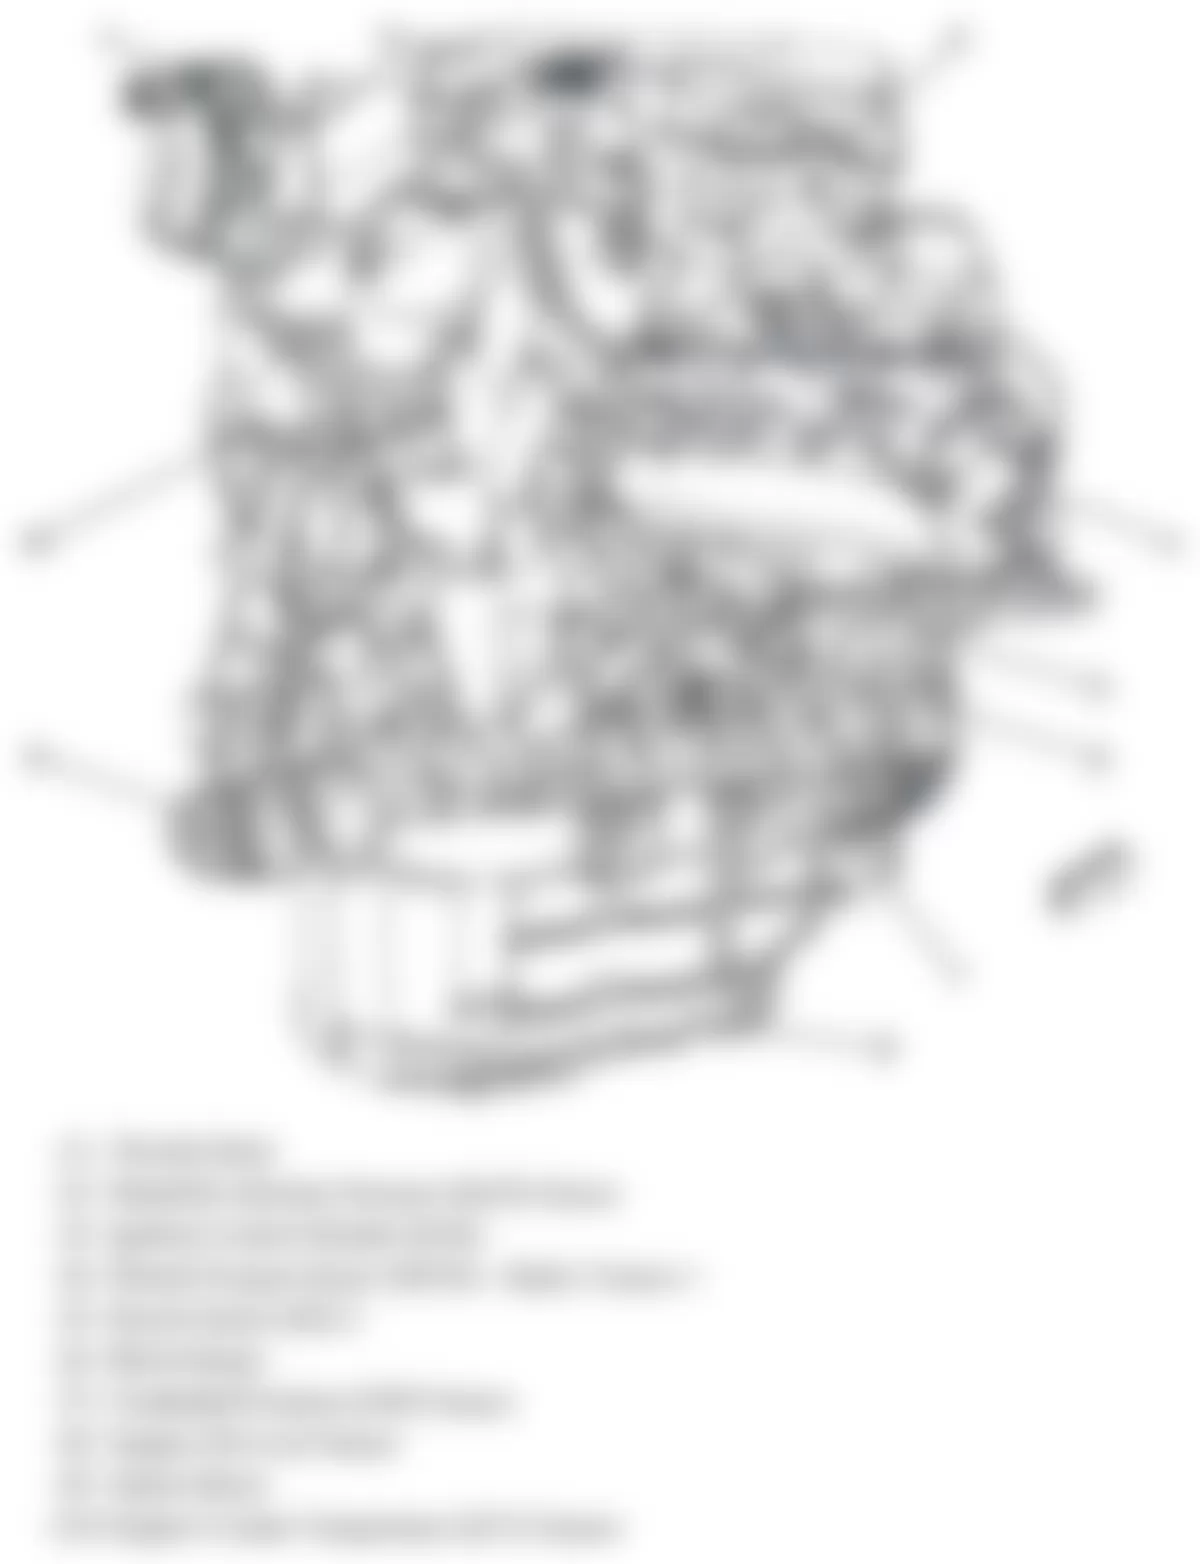 Buick Lucerne Super 2010 - Component Locations -  Right Side Of Engine (3.9L)